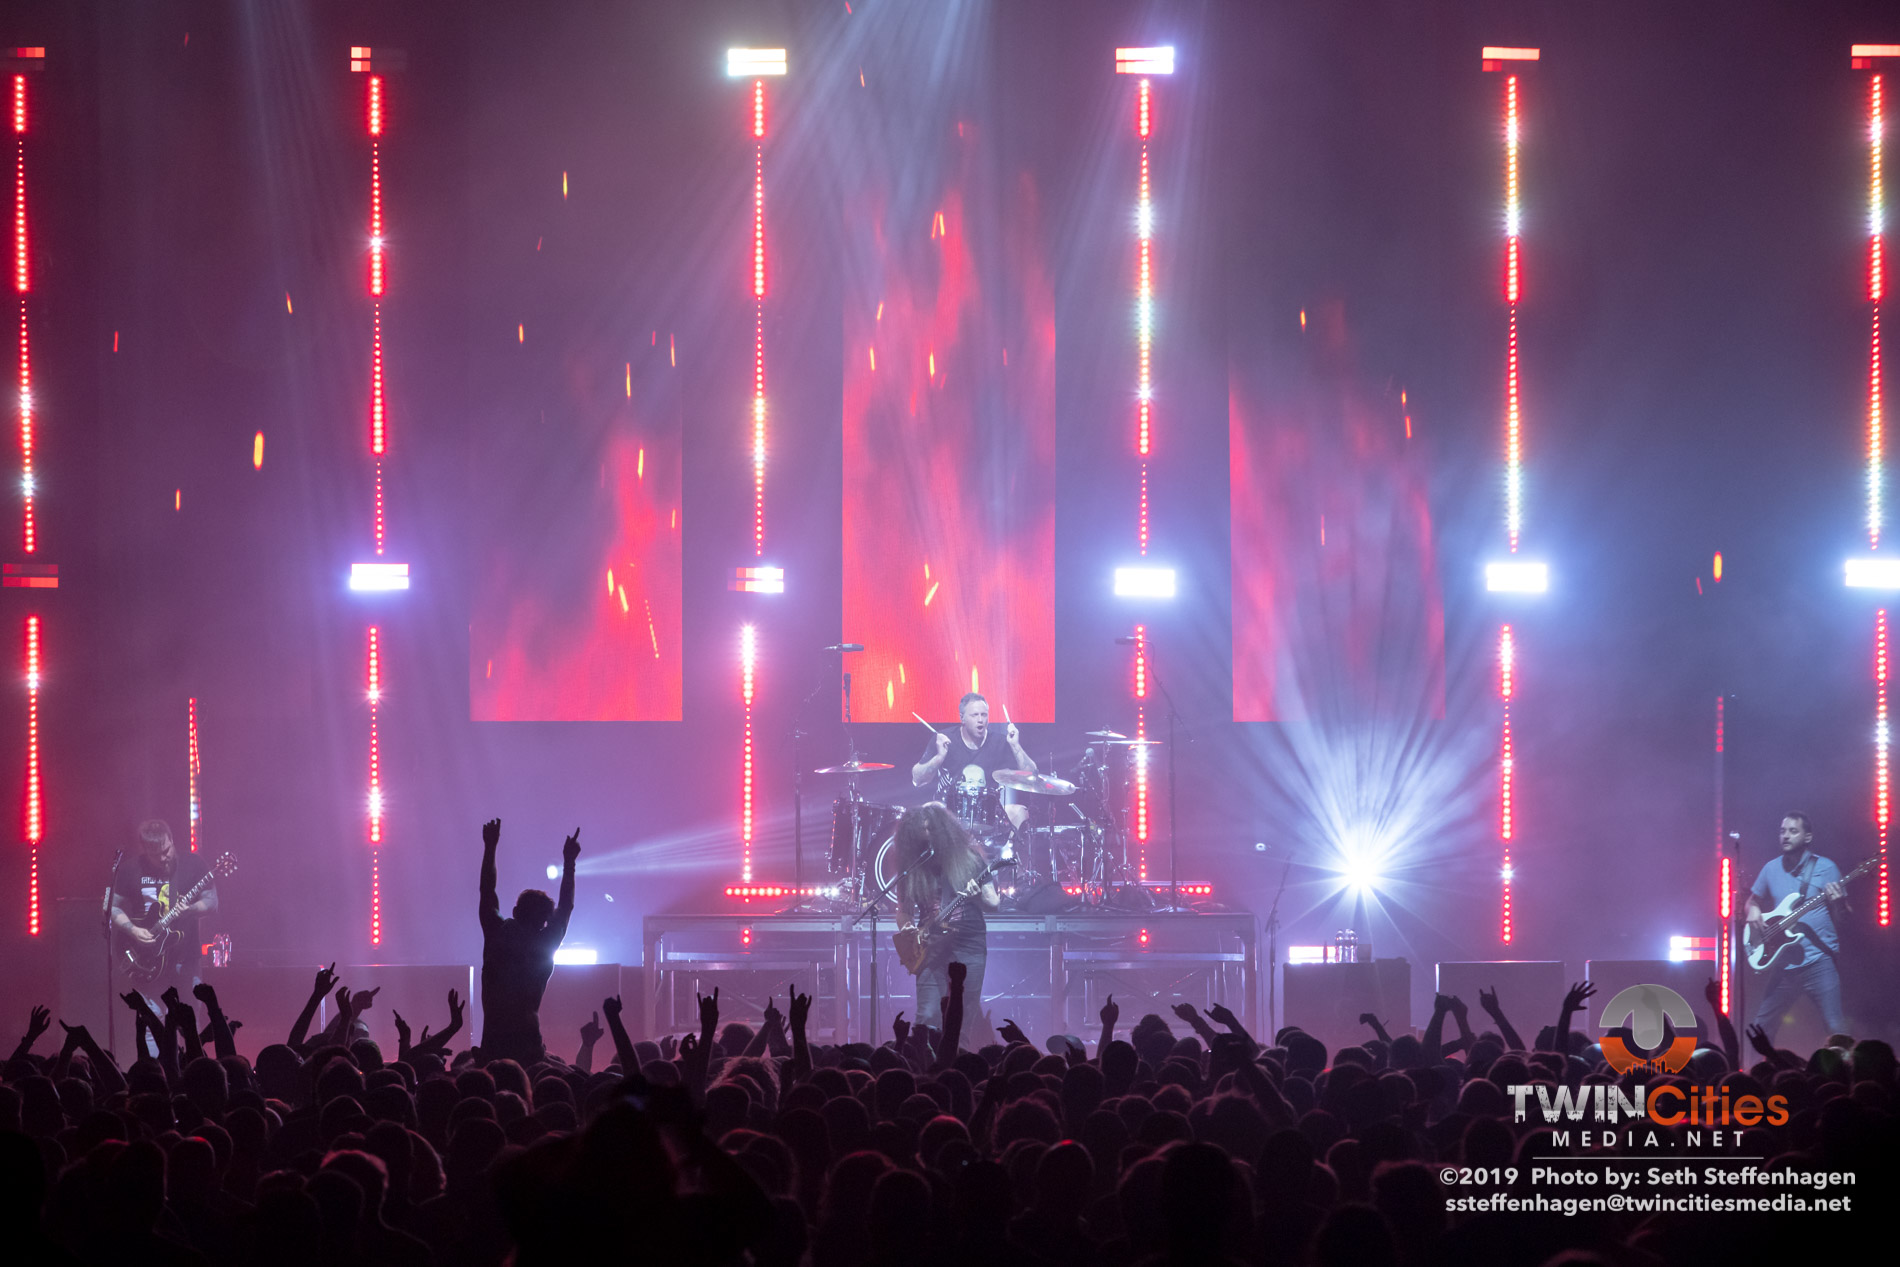 June 15, 2019 - Minneapolis, Minnesota, United States - Coheed & Cambria live in concert at The Armory along with Mastodon and Every Time I Die.(Photo by Seth Steffenhagen/Steffenhagen Photography)